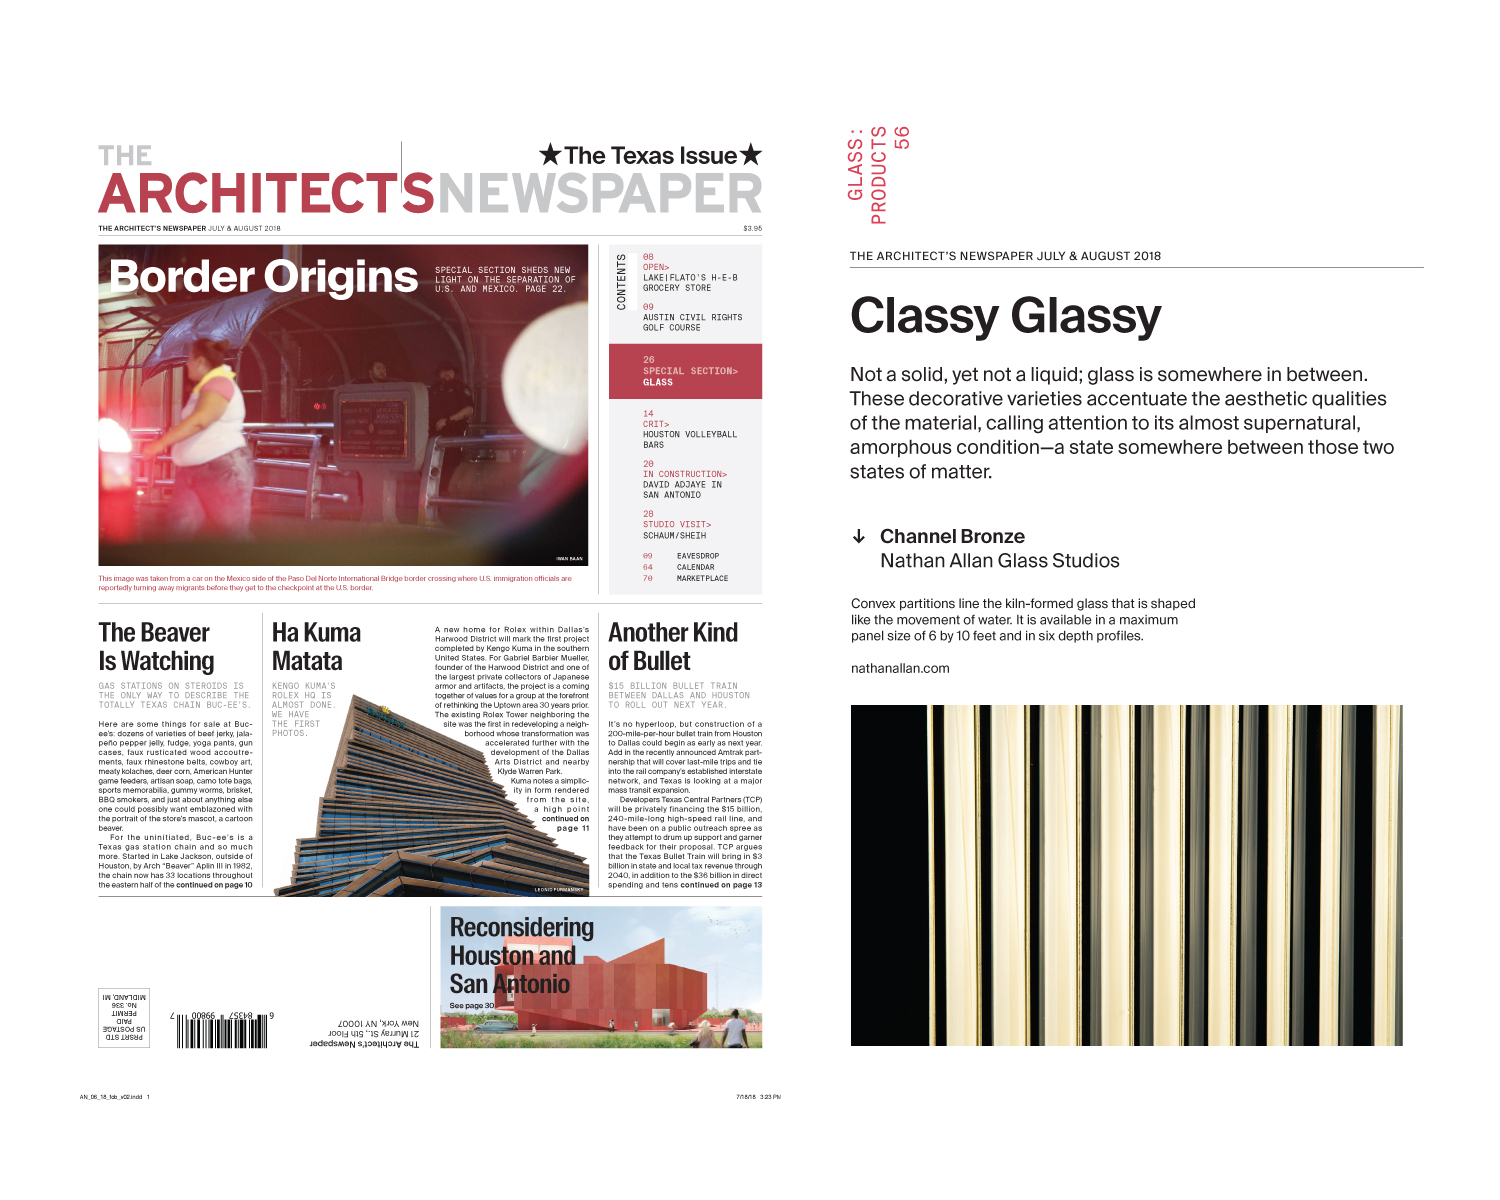 The Architect's Newspaper Channel Bronze 